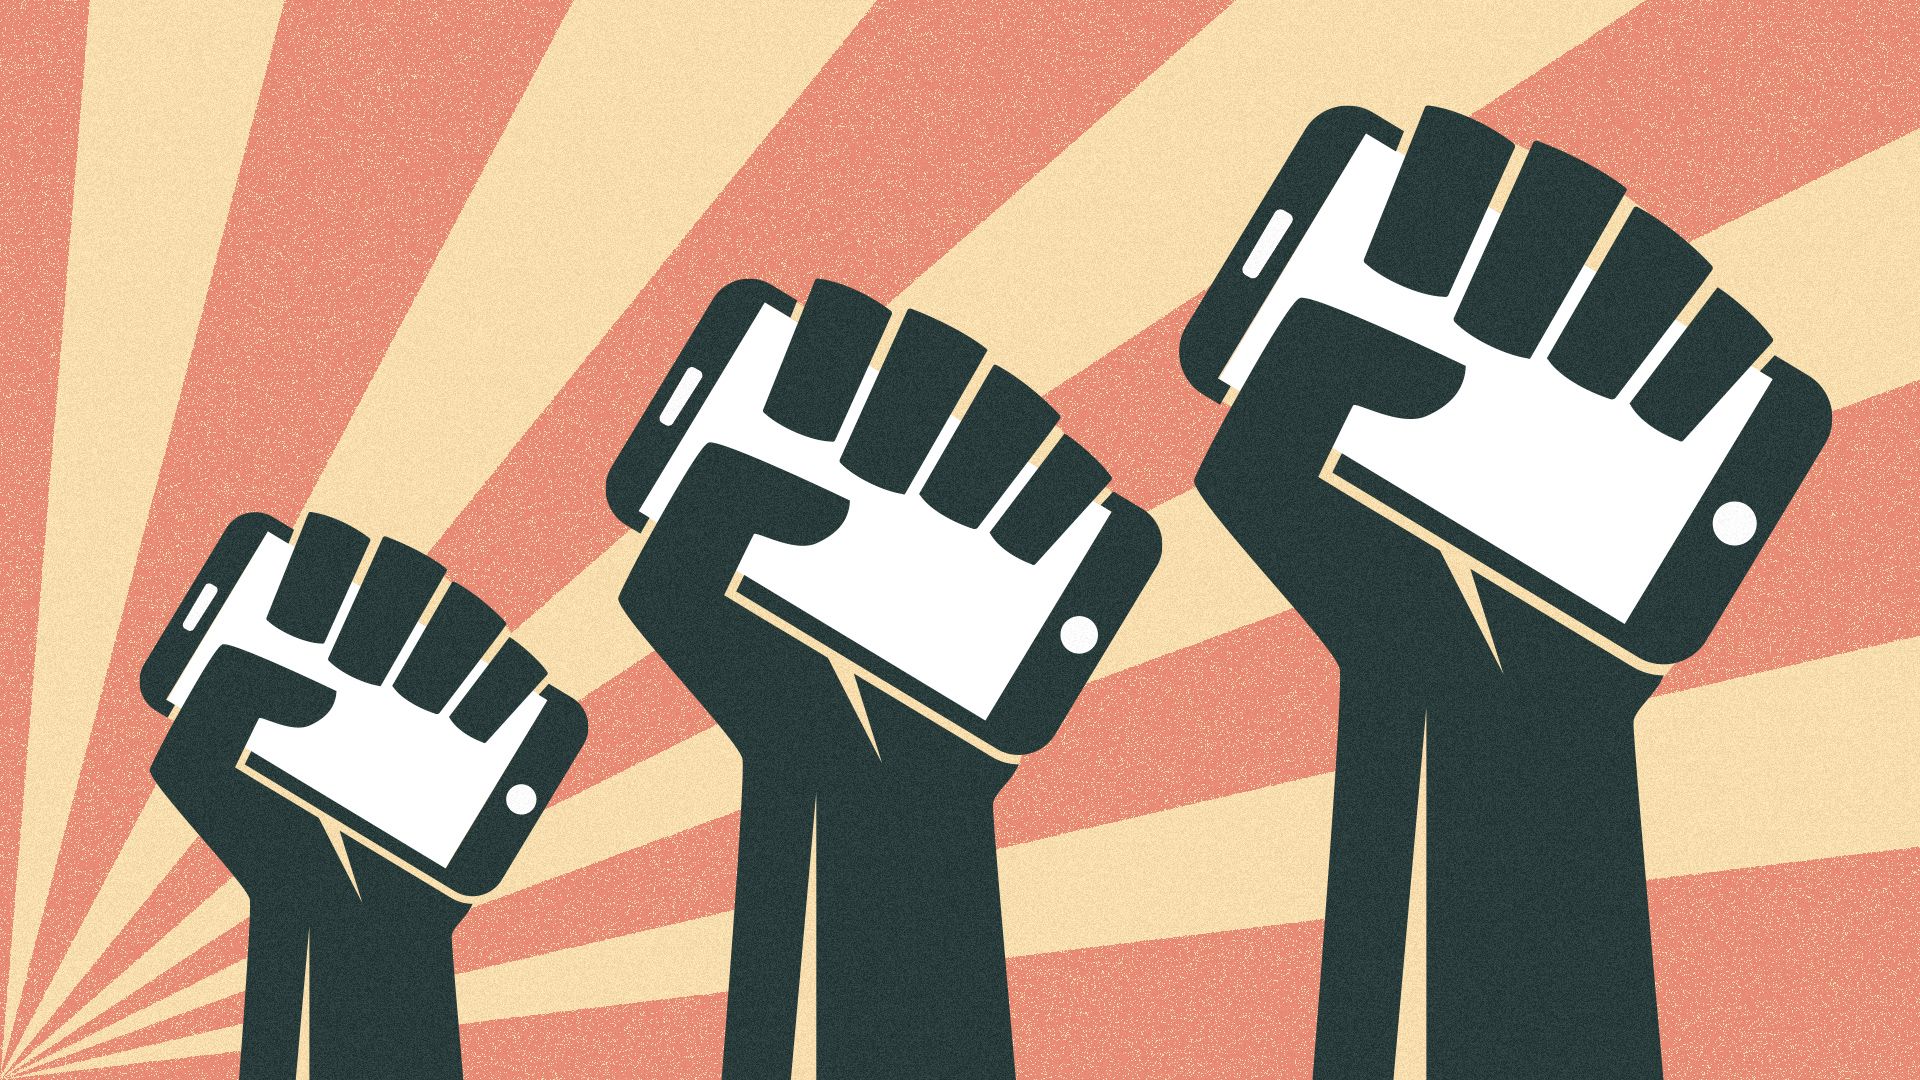 Illustration of three hands holding cell phones in a propaganda style poster